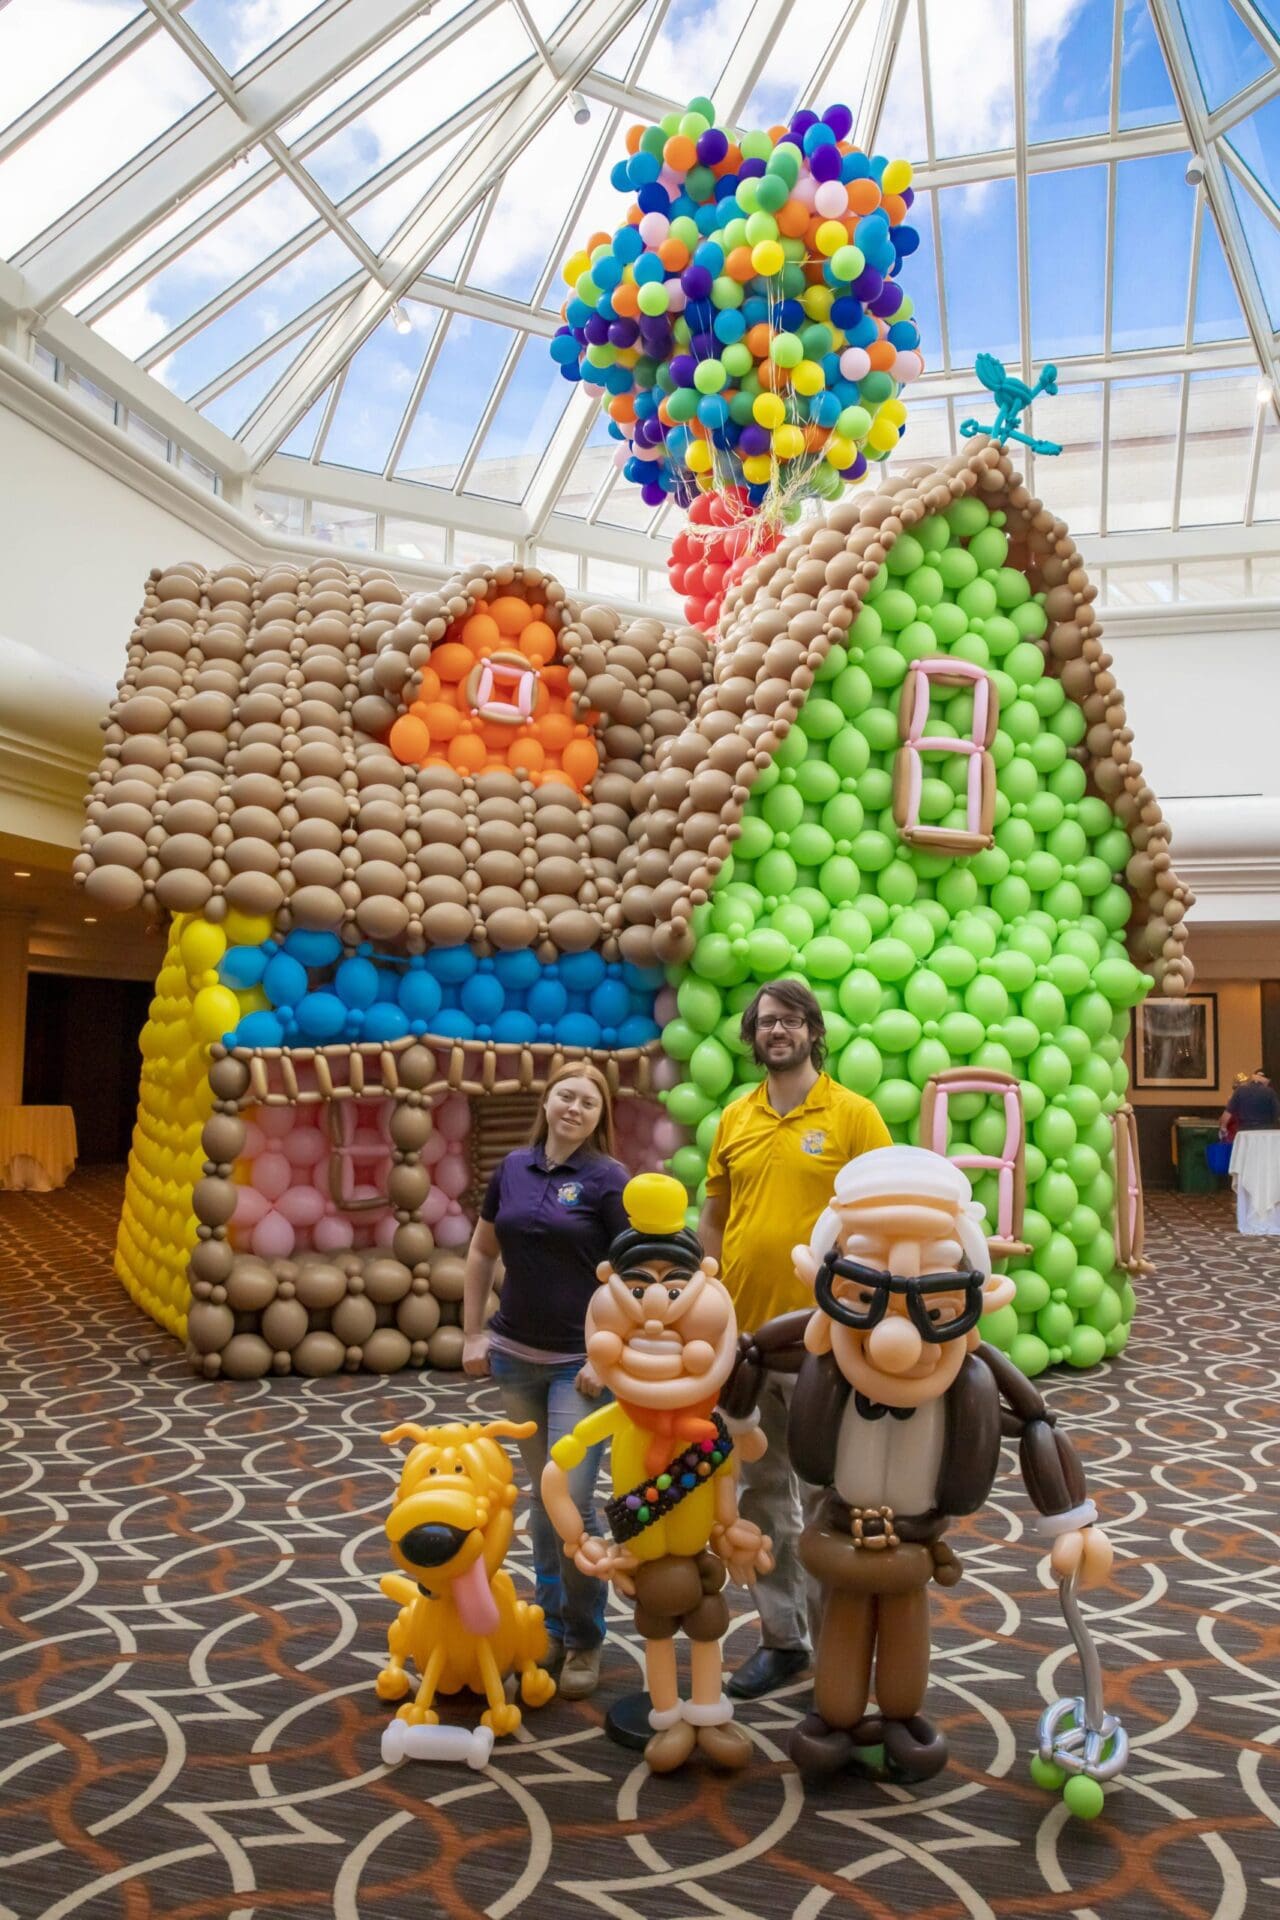 huge house made of balloons